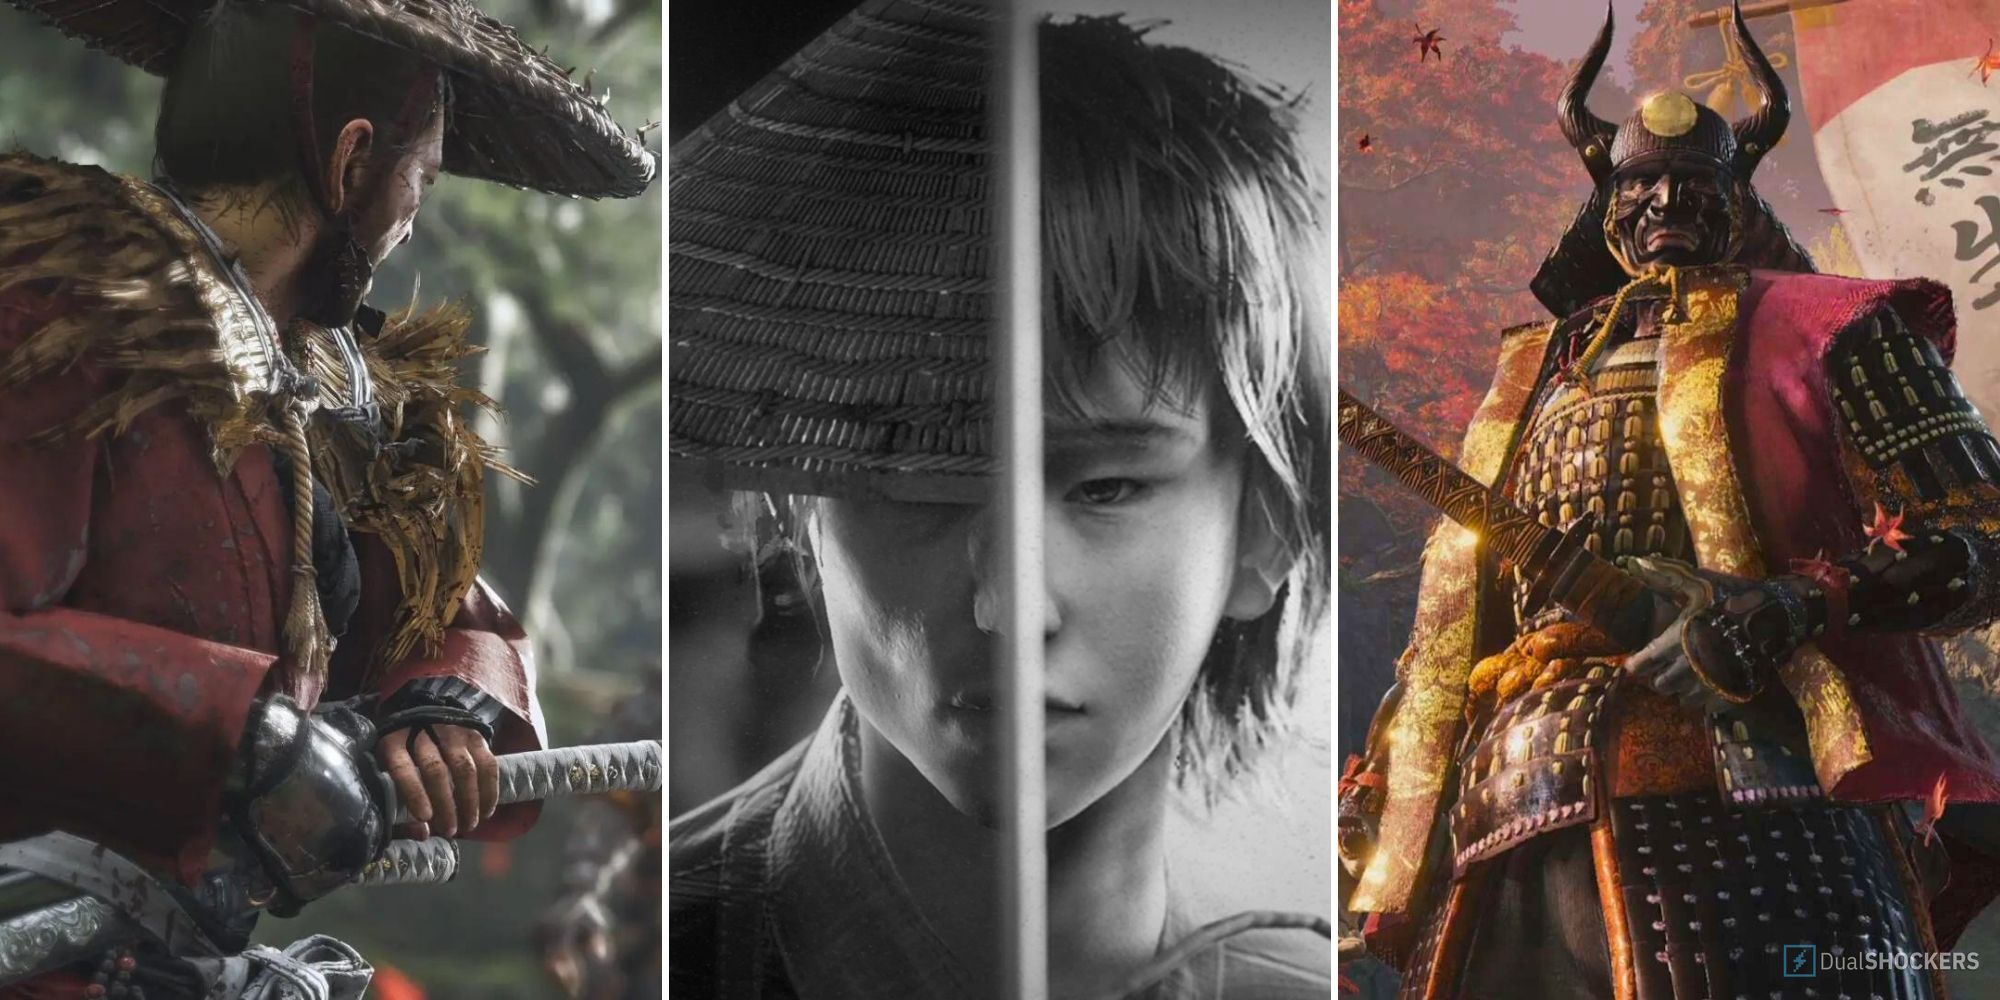 Split image showing the protagonists from Ghost of Tsushima, Trek to Yomi, Sekiro Shadows Die Twice set in Feudal Japan.